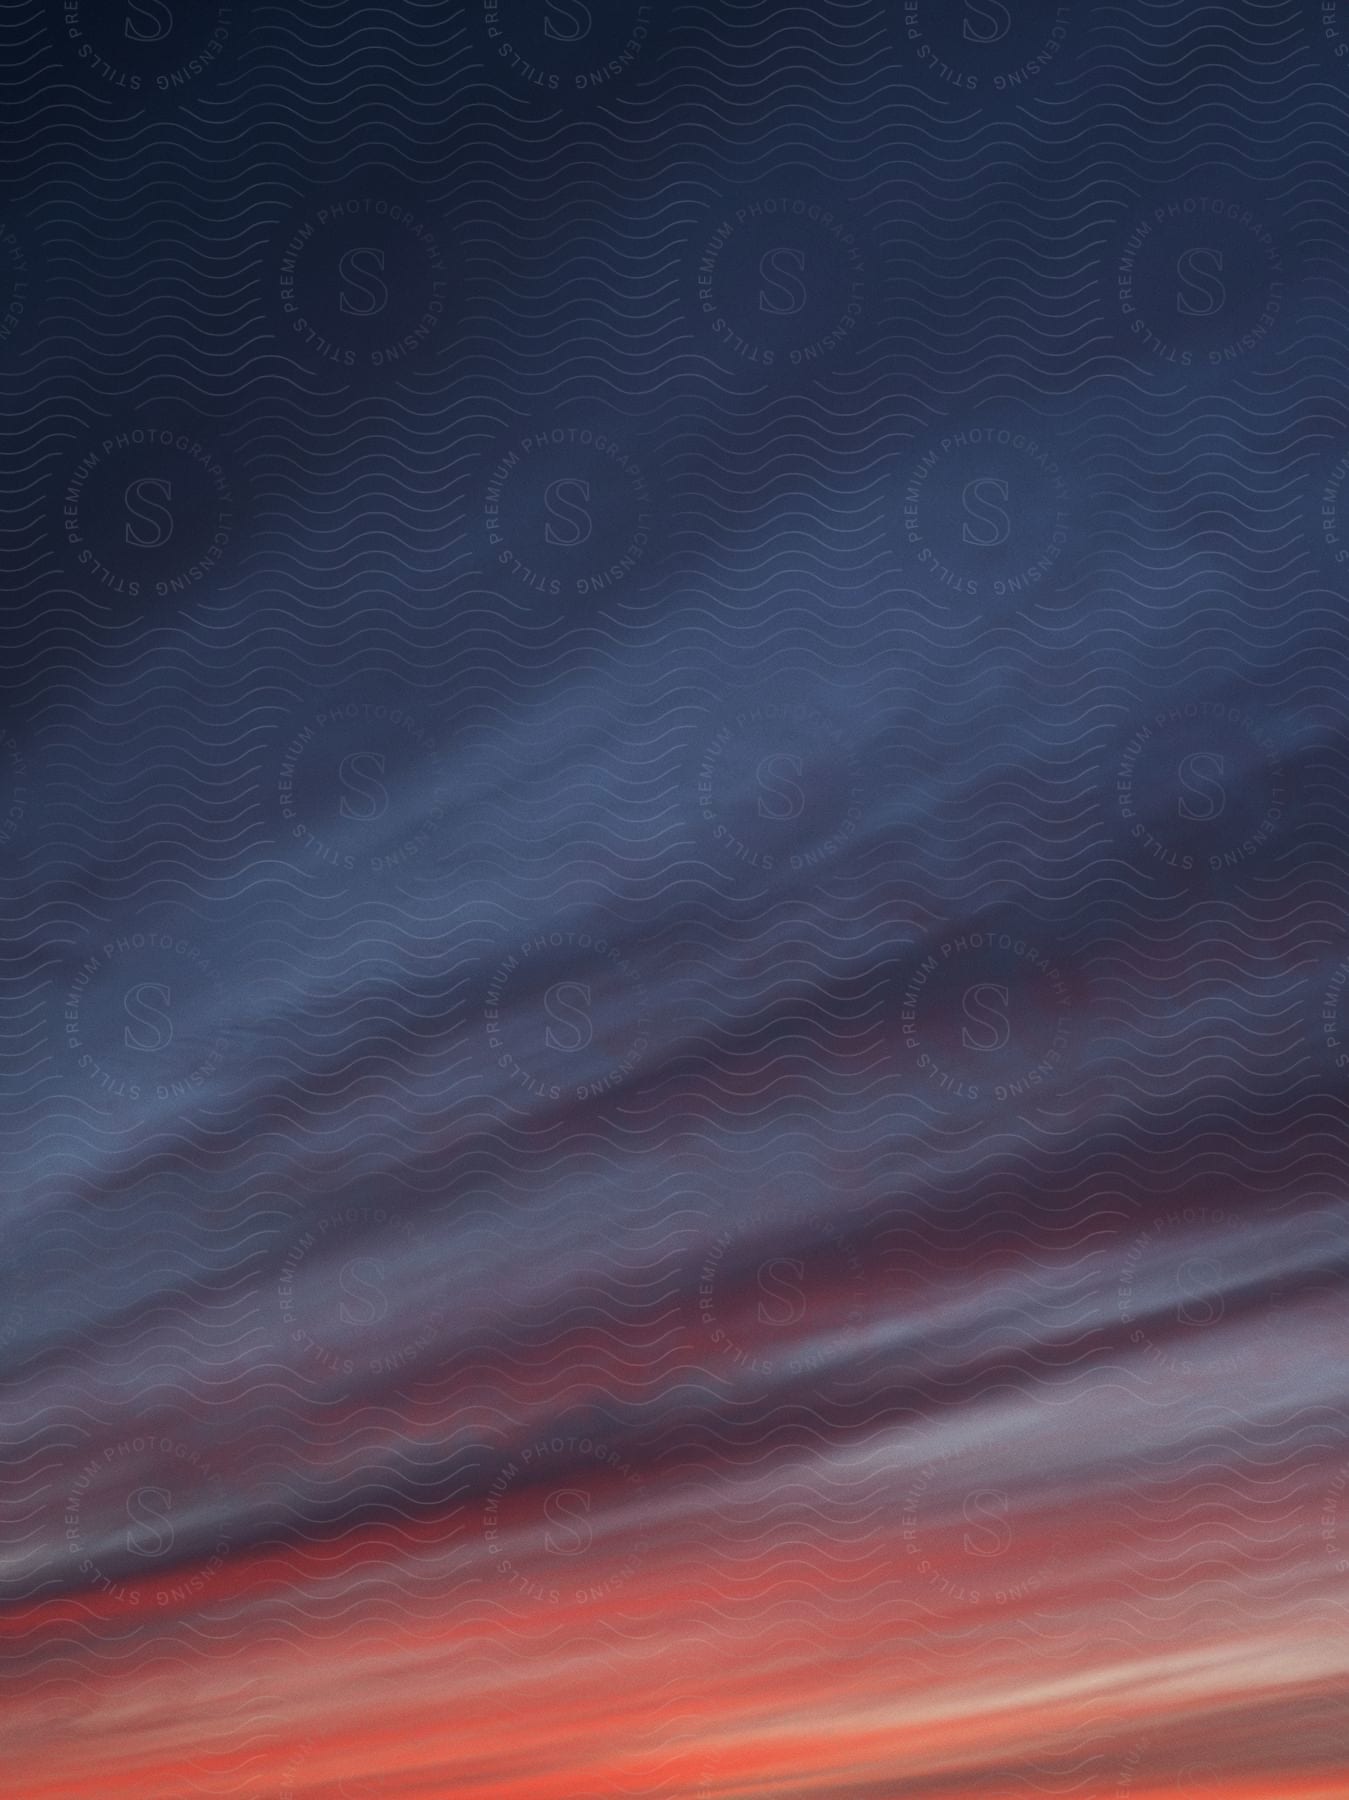 Red and dark blue hues blend together to form a captivating wavelike pattern in the sky at dusk